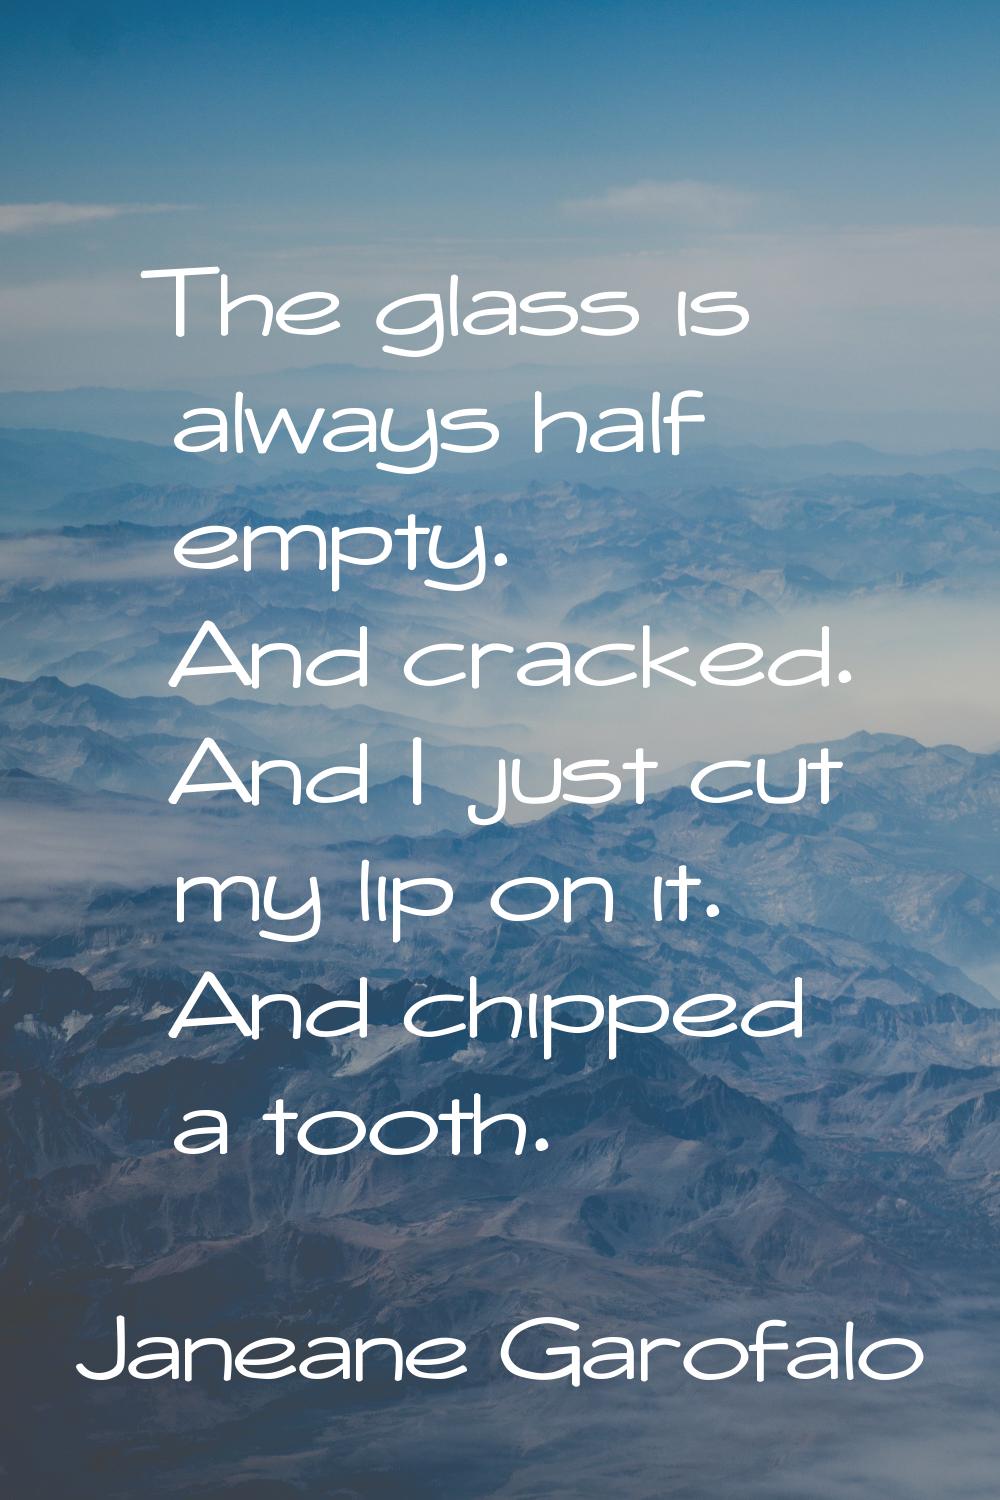 The glass is always half empty. And cracked. And I just cut my lip on it. And chipped a tooth.